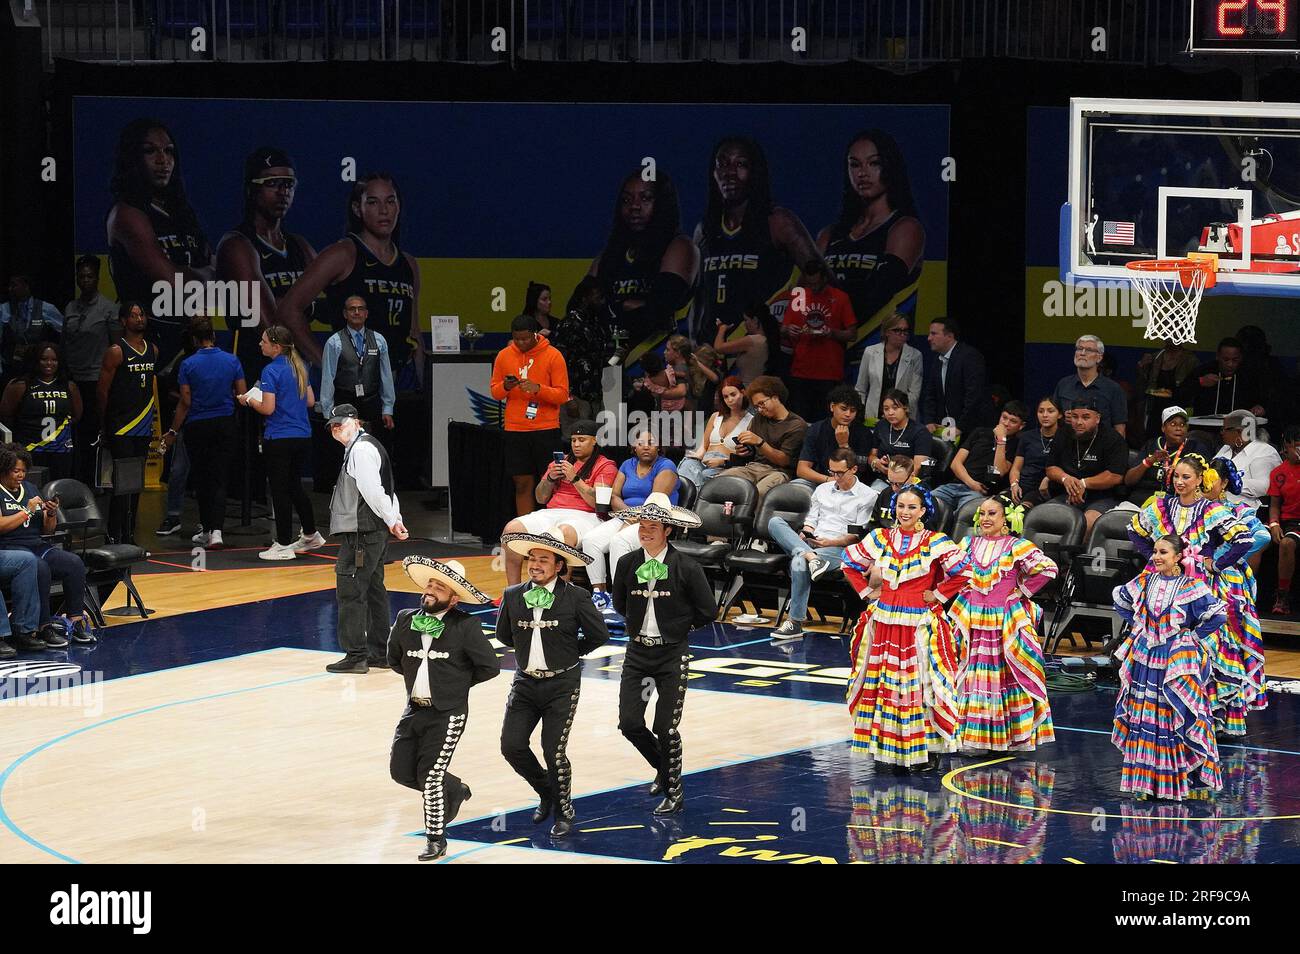 Arlington, United States. 28th July, 2023. July 28, 2023, Arlington, Texas, United States: As part of the Dallas Wings Celebracion Latina, the Anita N. Martinez Ballet Folklorico performed during half time of the WNBA game between the Dallas Wings and the Washington Mystics at College Park Center on July28, 2023 in Arlington, Texas, United States. (Photo by Javier Vicencio/Eyepix Group) Credit: Eyepix Group/Alamy Live News Stock Photo